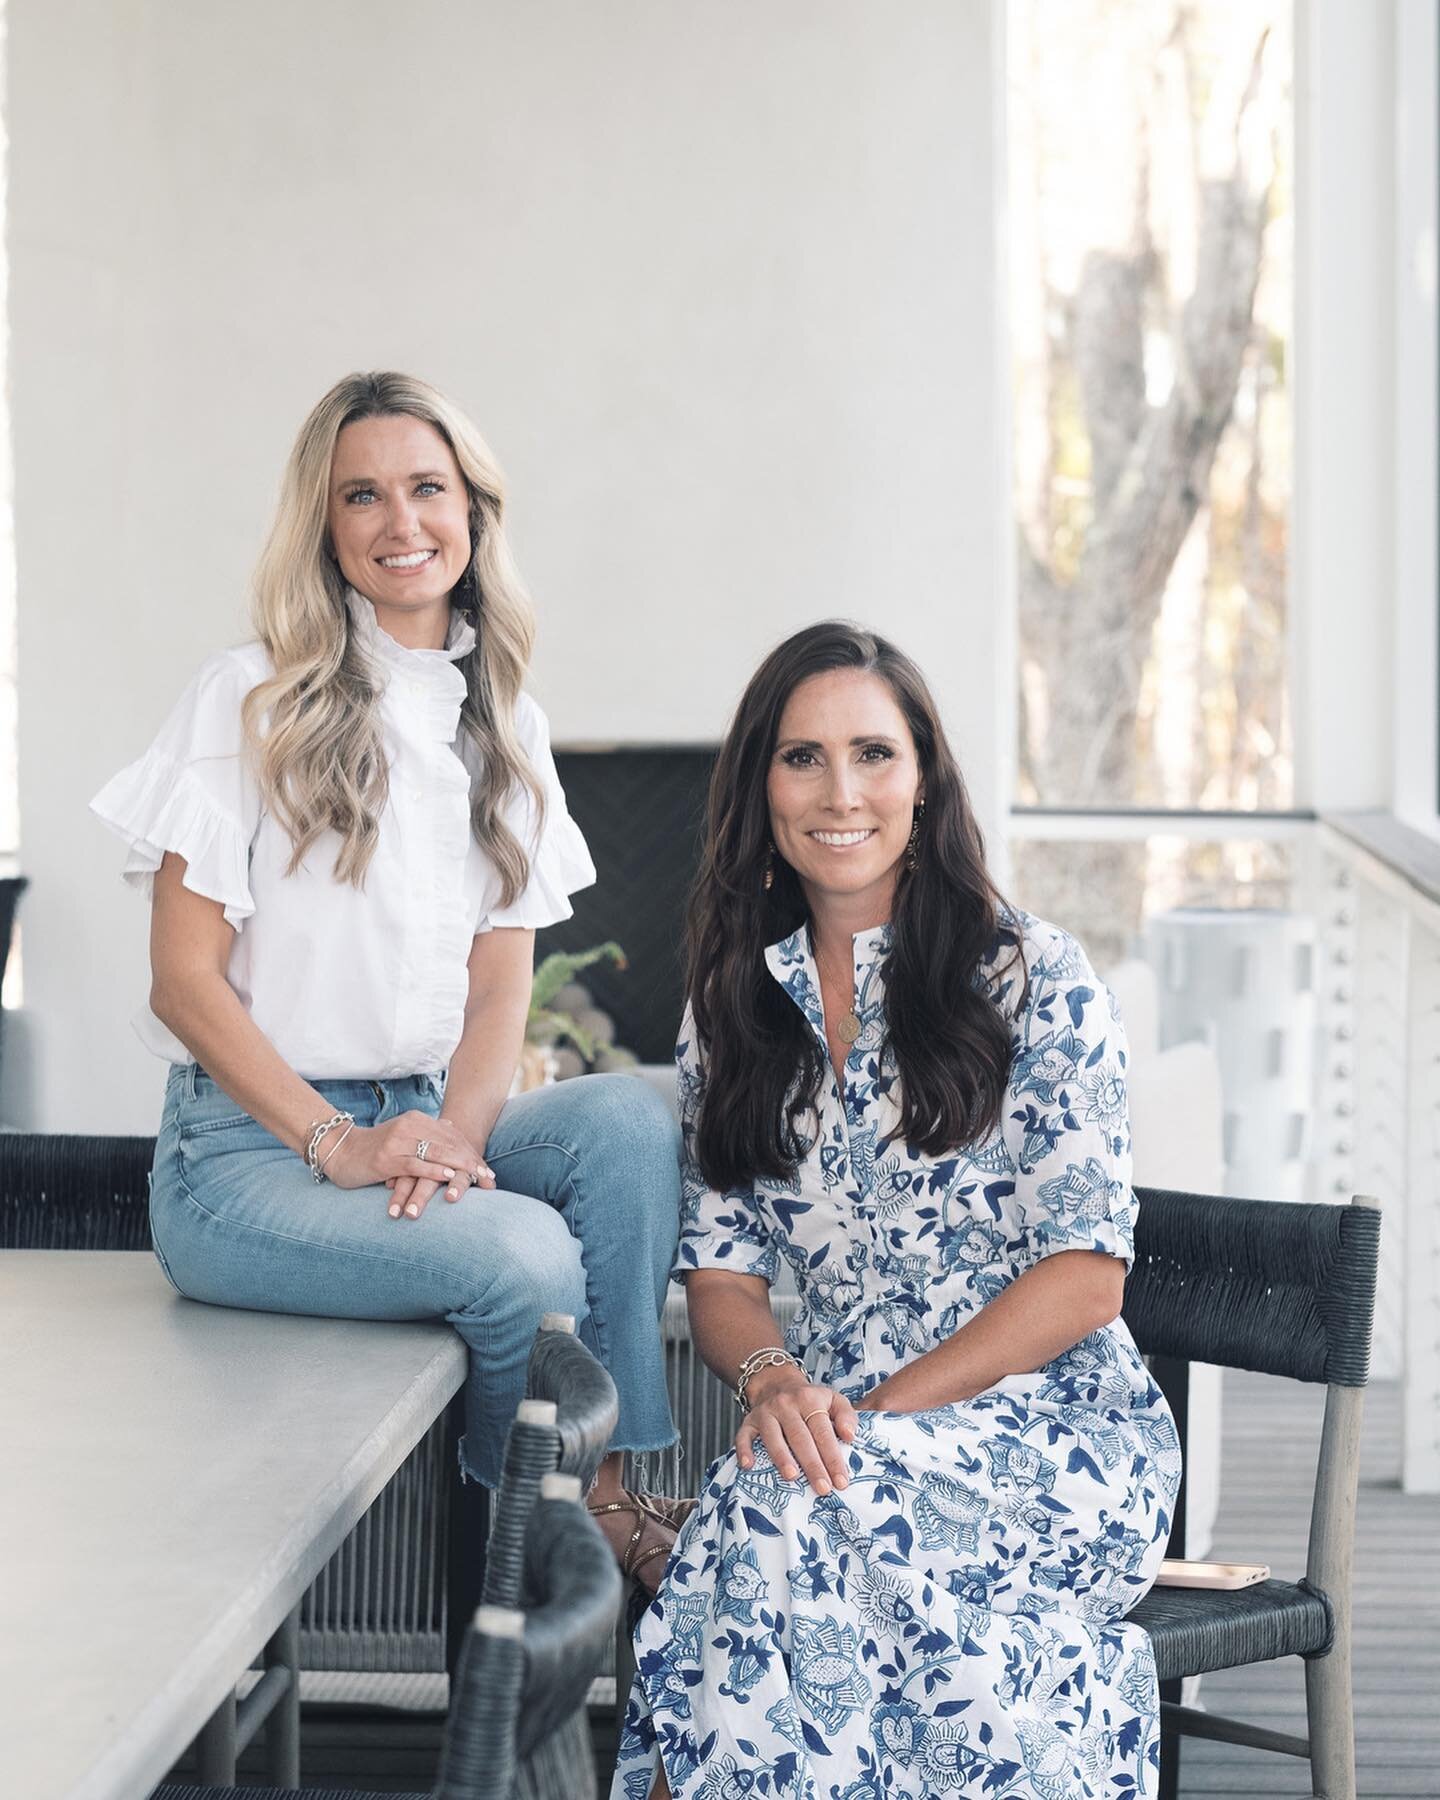 It's #NationalEntrepreneursDay and we would be remiss if we didn't give this dynamic duo a shoutout! 🤍
⠀⠀⠀⠀⠀⠀⠀⠀⠀
Christina and Rebecka have been trailblazers in the Professional Organization industry, transforming homes across Austin and (more recen